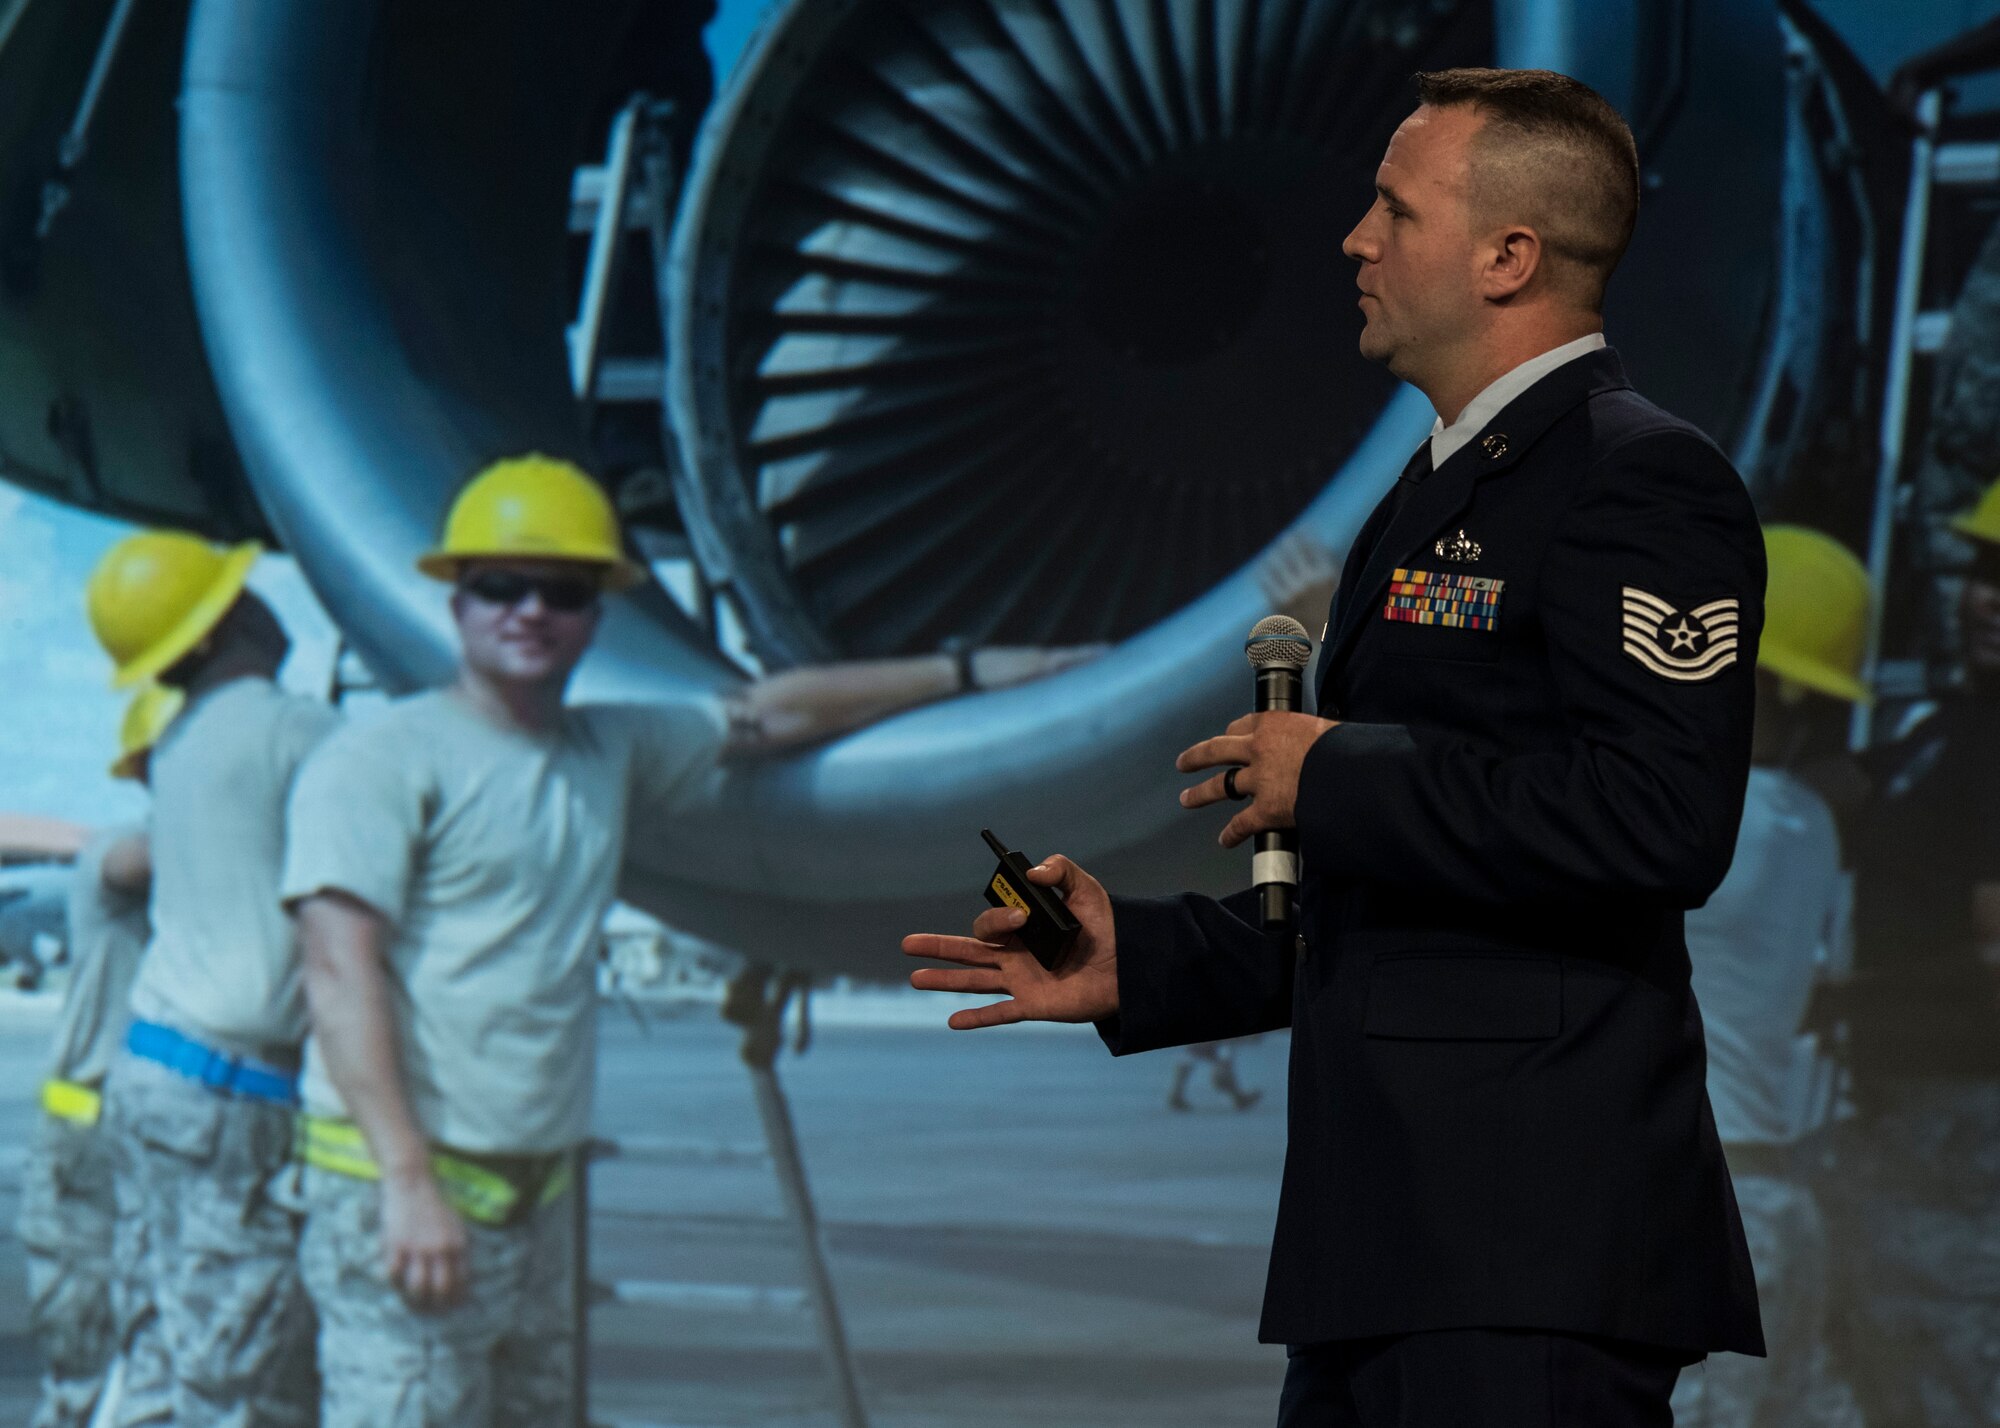 Tech. Sgt. Shawn Roberge from the 92nd Air Refueling Wing presents his design for a KC-135 Stratotanker engine-specific maintenance platform stand during the 2018 Air Mobility Command Phoenix Spark Tank competition, where four finalists pitched their innovation ideas to a panel of judges at the Airlift/Tanker Association Symposium in Grapevine, Texas, Oct. 27, 2018. A/TA, AMC's premier professional development event, provides mobility Airmen an opportunity to learn about and discuss mobility priorities, issues, challenges, and successes. The venue creates dialogue between industry experts, the Air Force and Department of Defense about ways to innovate, enhance mission effects and advance readiness headed into the future.   (U.S. Air Force photo by Tech. Sgt. Jodi Martinez)